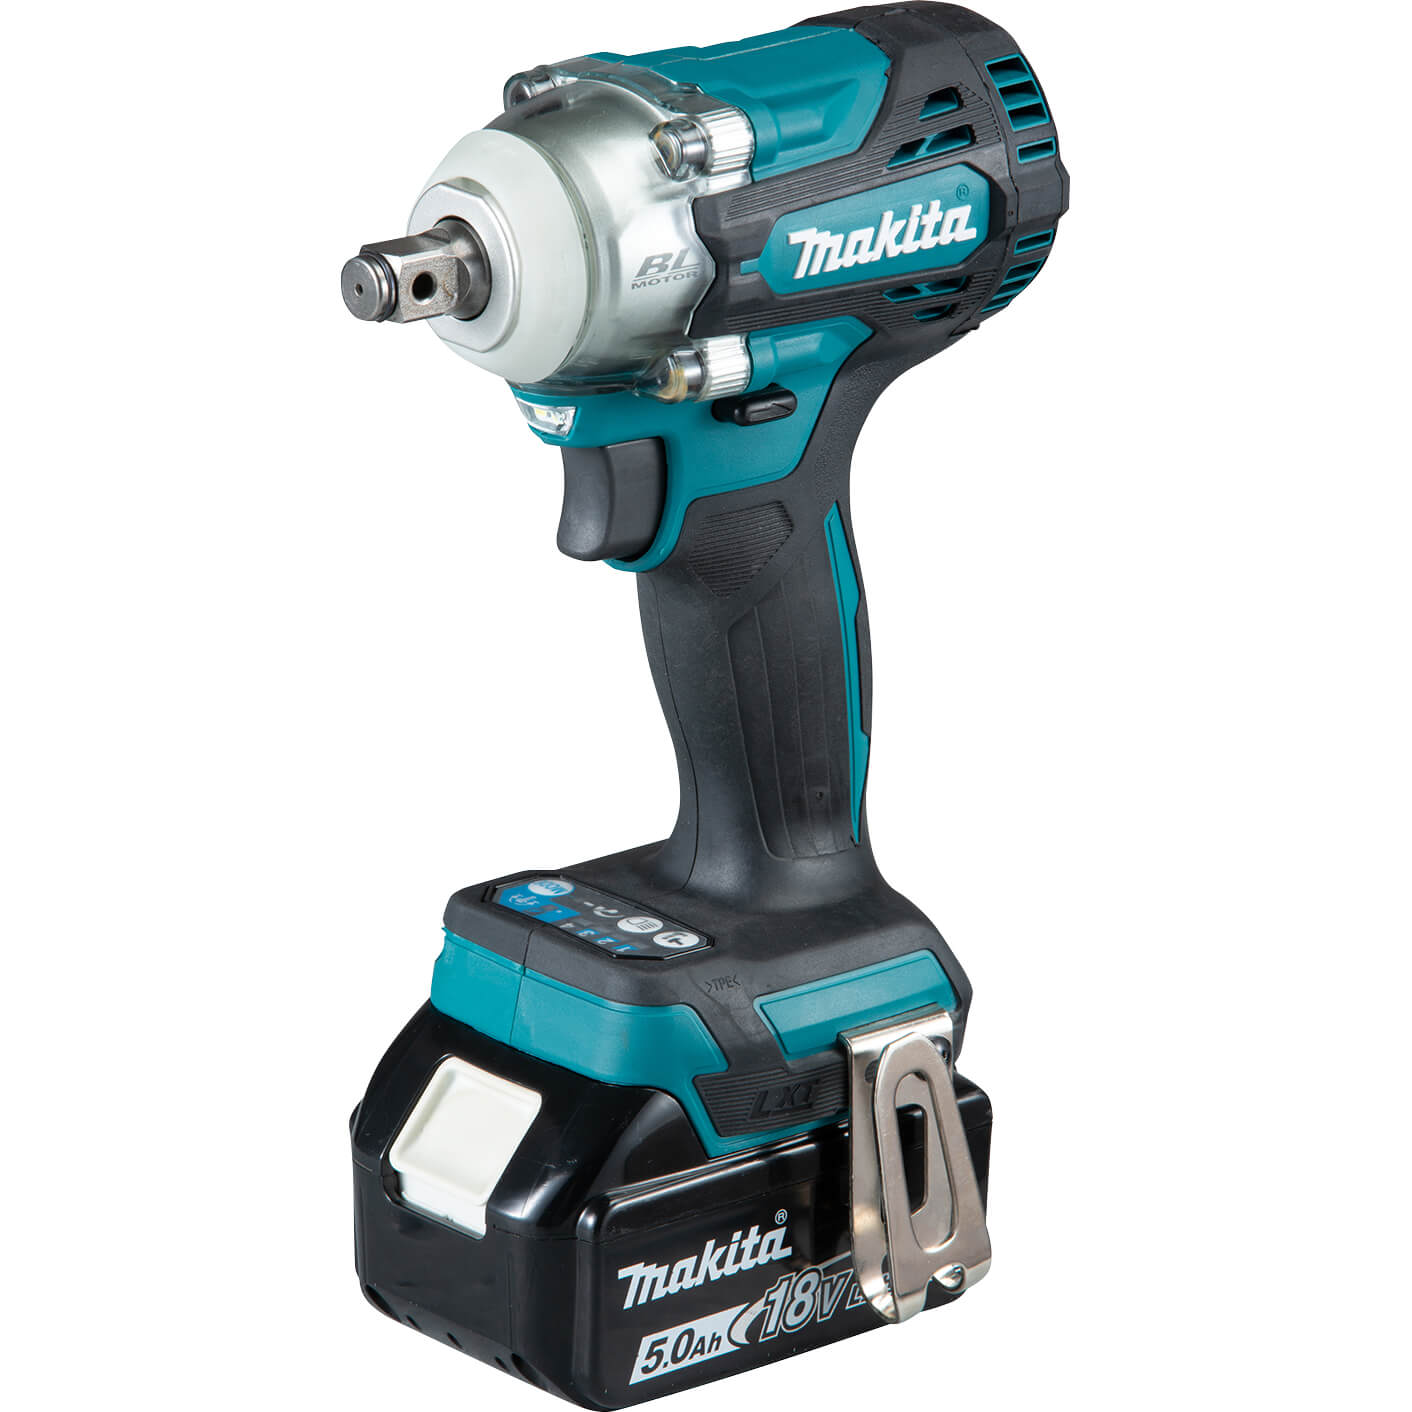 Makita DTW300 18v LXT Cordless Brushless 1/2" Drive Impact Wrench 2 x 5ah Li-ion Charger Case